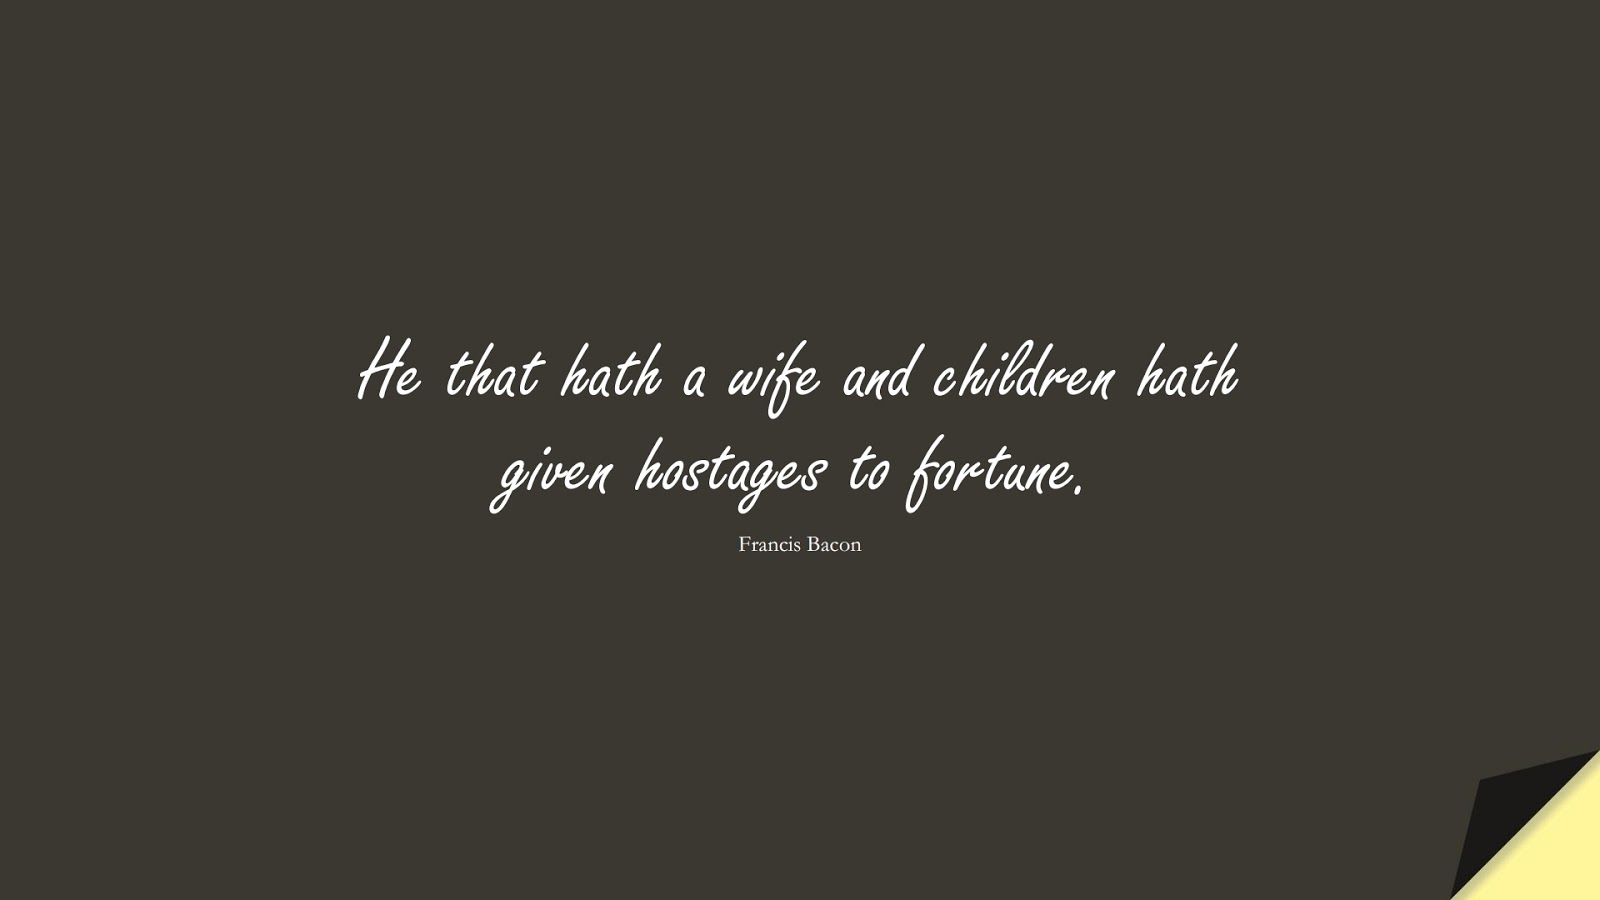 He that hath a wife and children hath given hostages to fortune. (Francis Bacon);  #FamilyQuotes